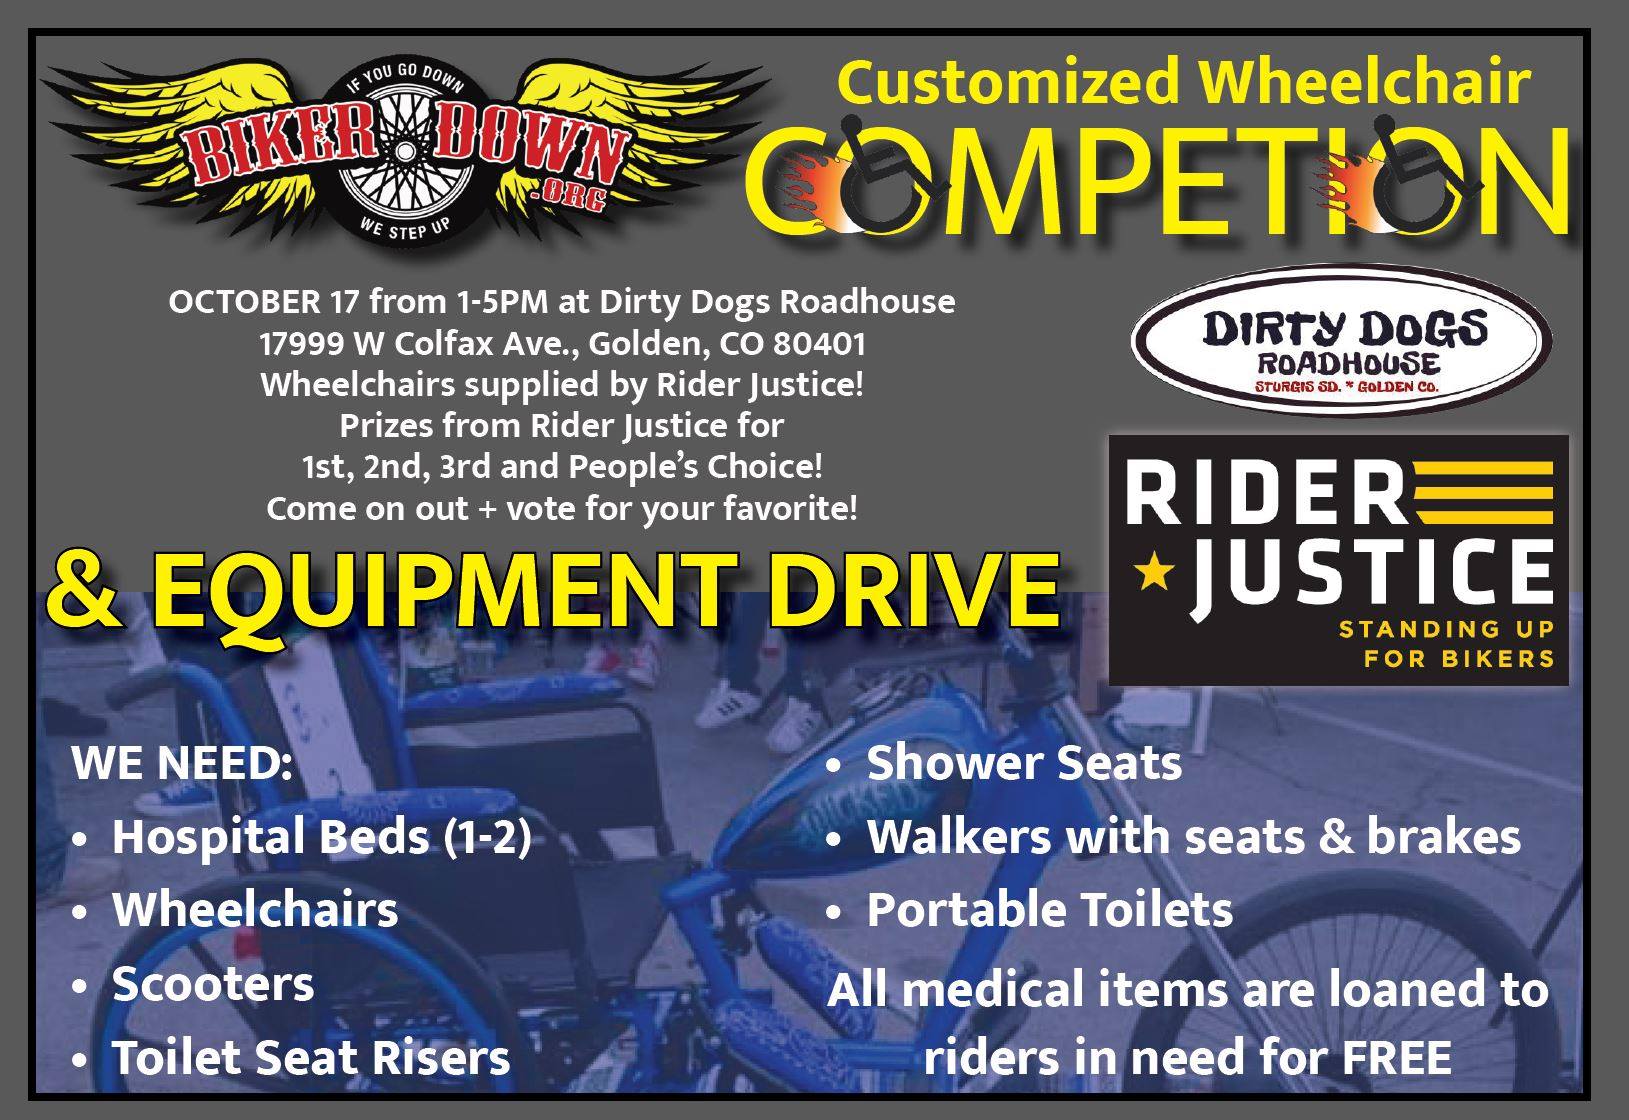 Winners of BikerDown’s Customized Wheelchair Competition